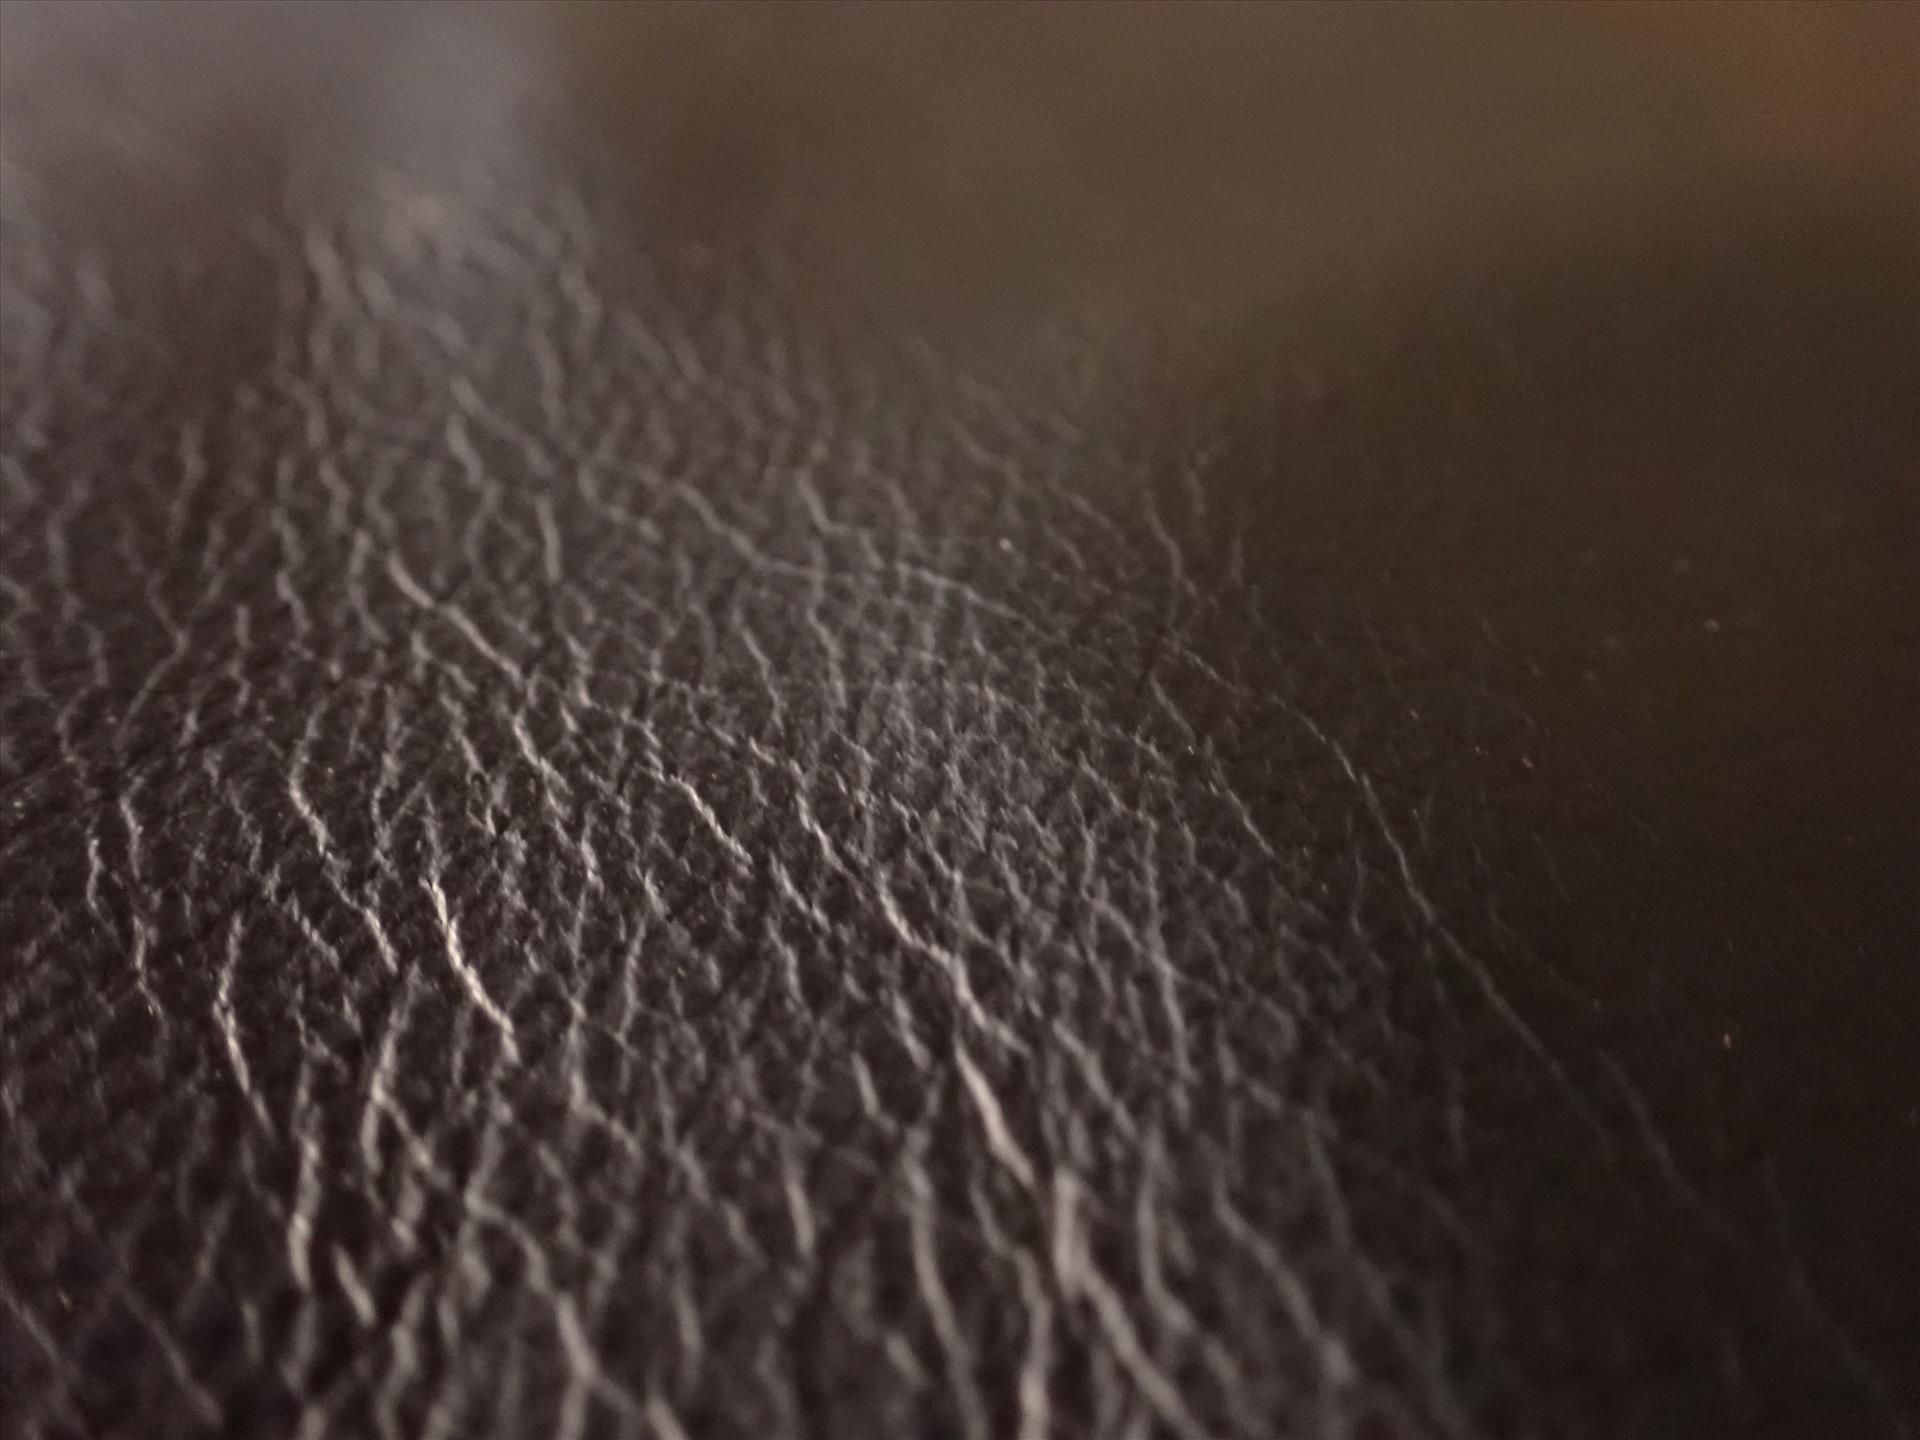 Leather, Sierra/Black/Futura, partial hide, approx. 25 sq ft - Image 2 of 2